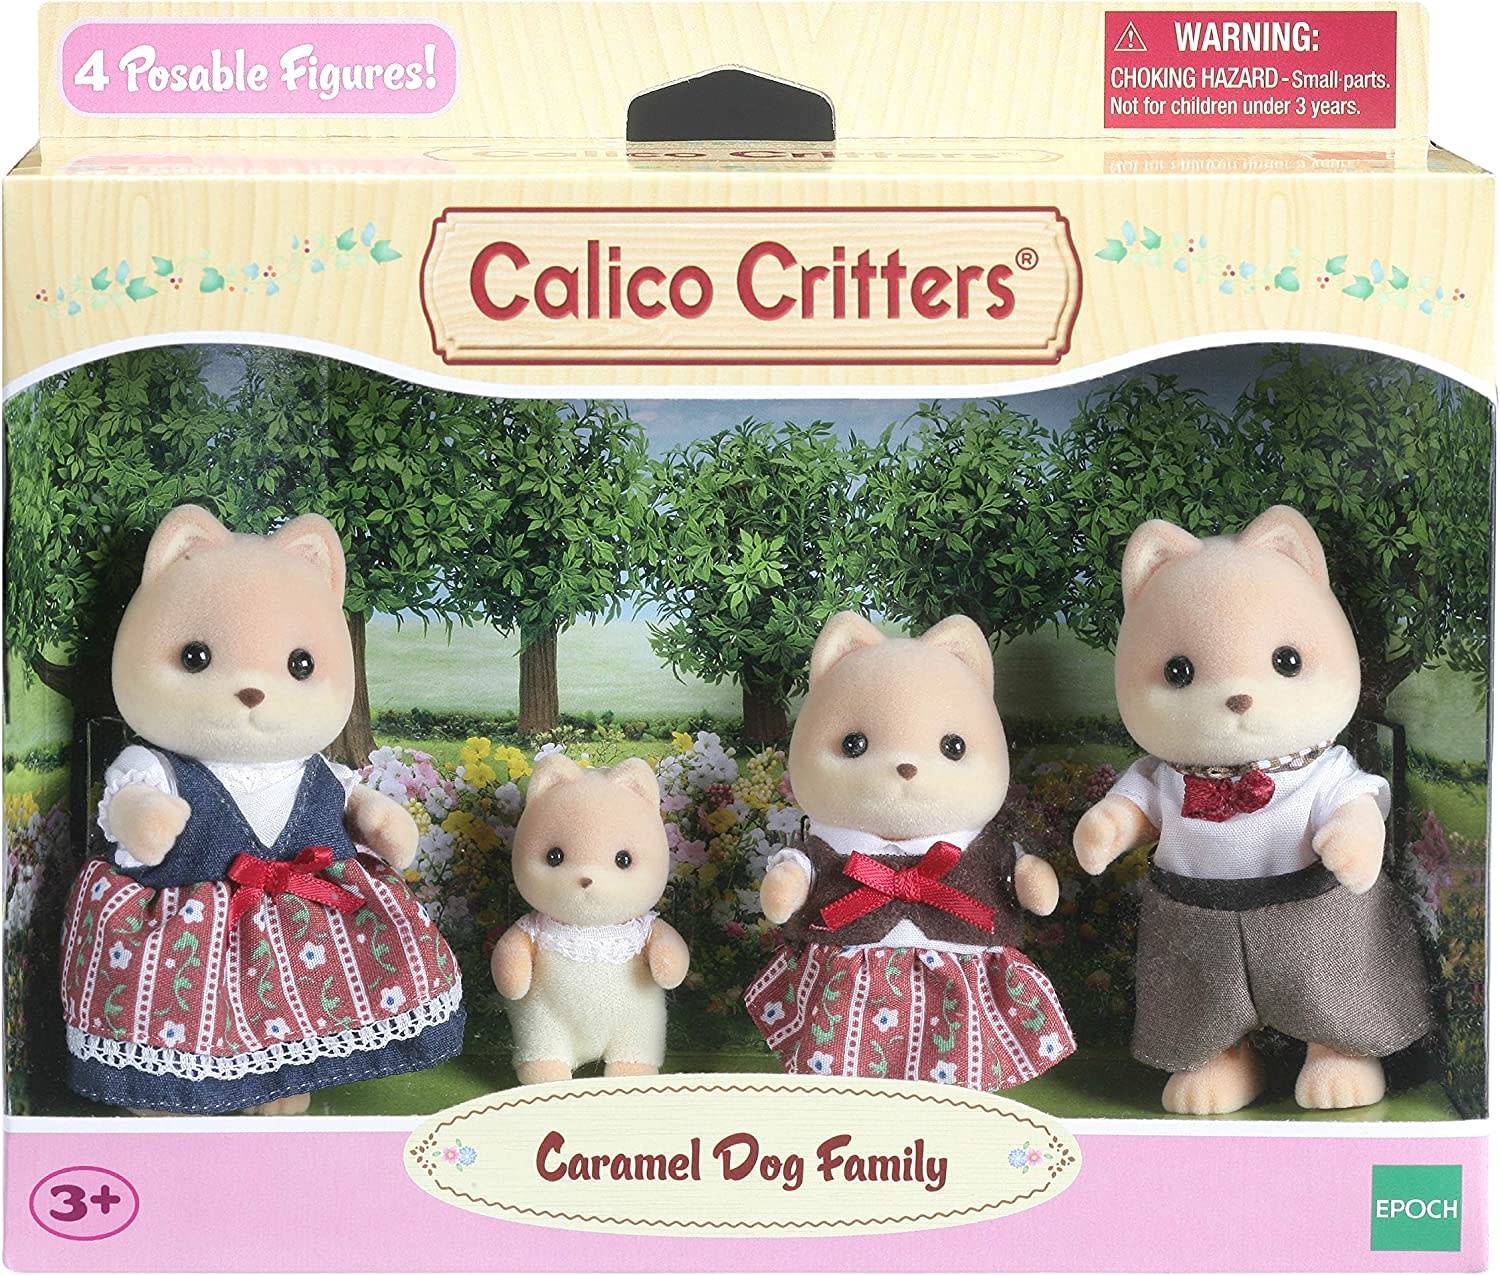 Calico Critters Caramel Dog Family - Wit & Whimsy Toys